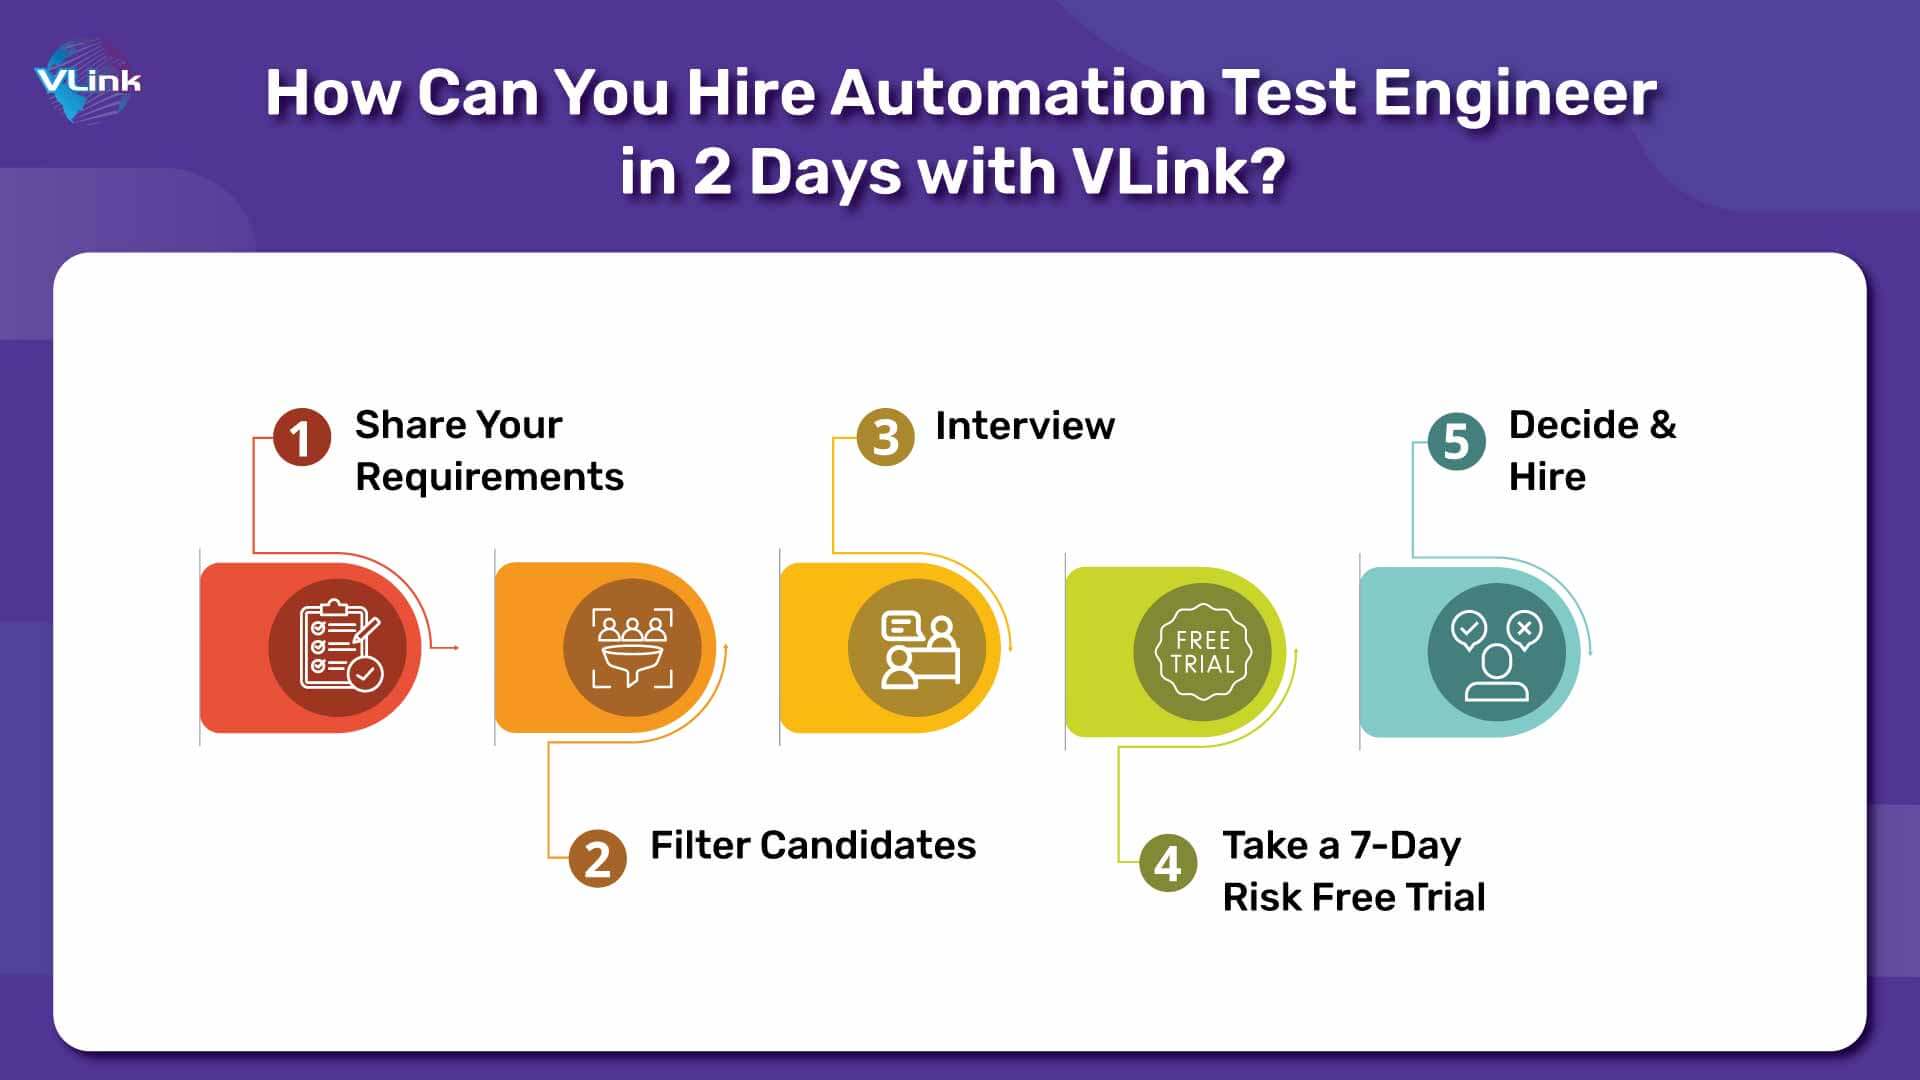 How Can You Hire Automation Test Engineer in 2 Days with VLink?